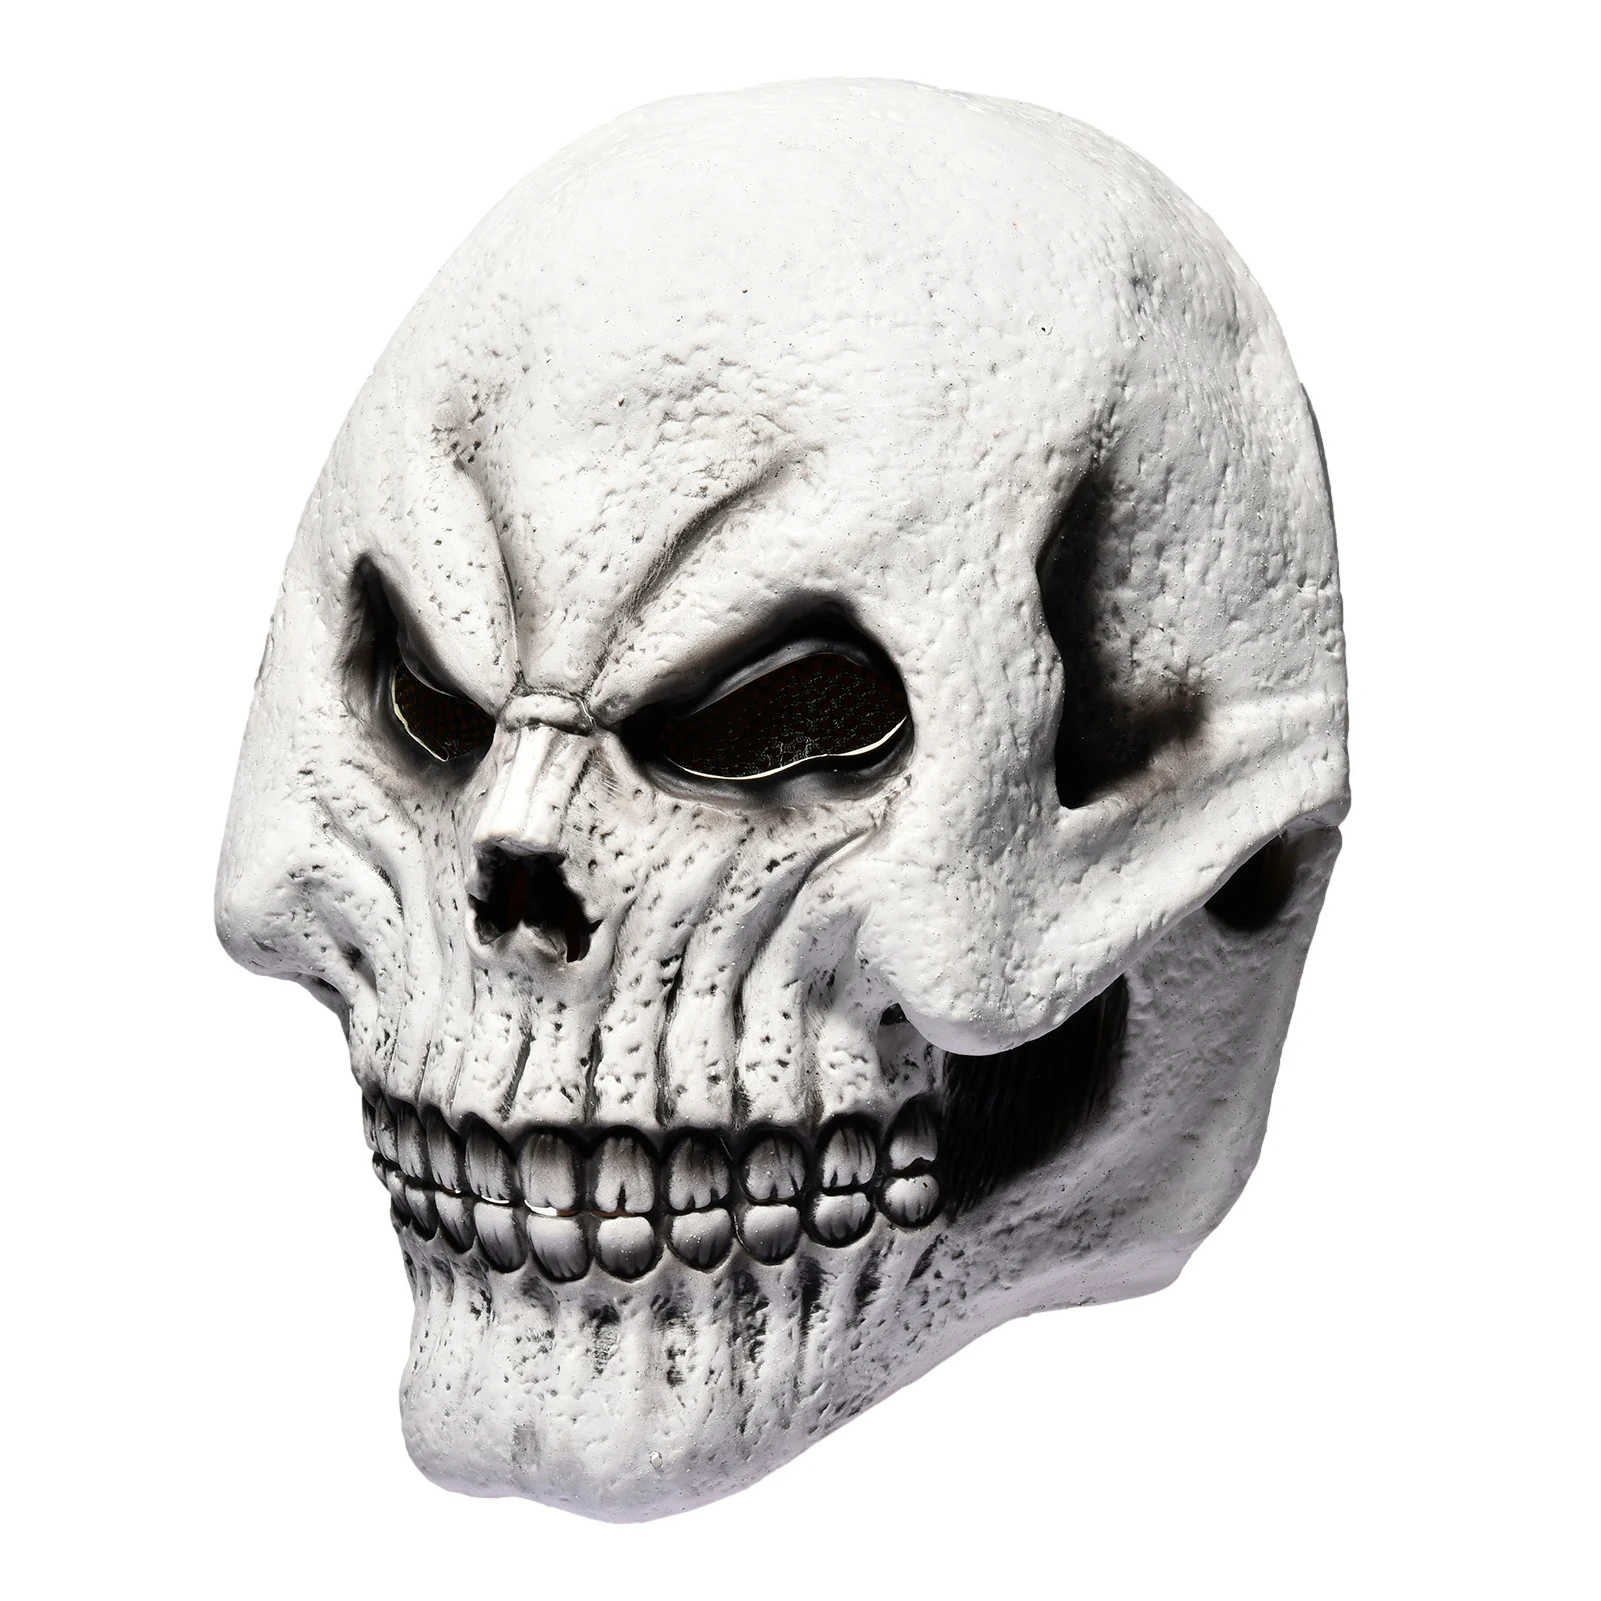 

2021 Realistic Skull Masque Halloween Skeleton Headgear Horror Props Face Cover Scary Mask For Halloween Party Haunted House